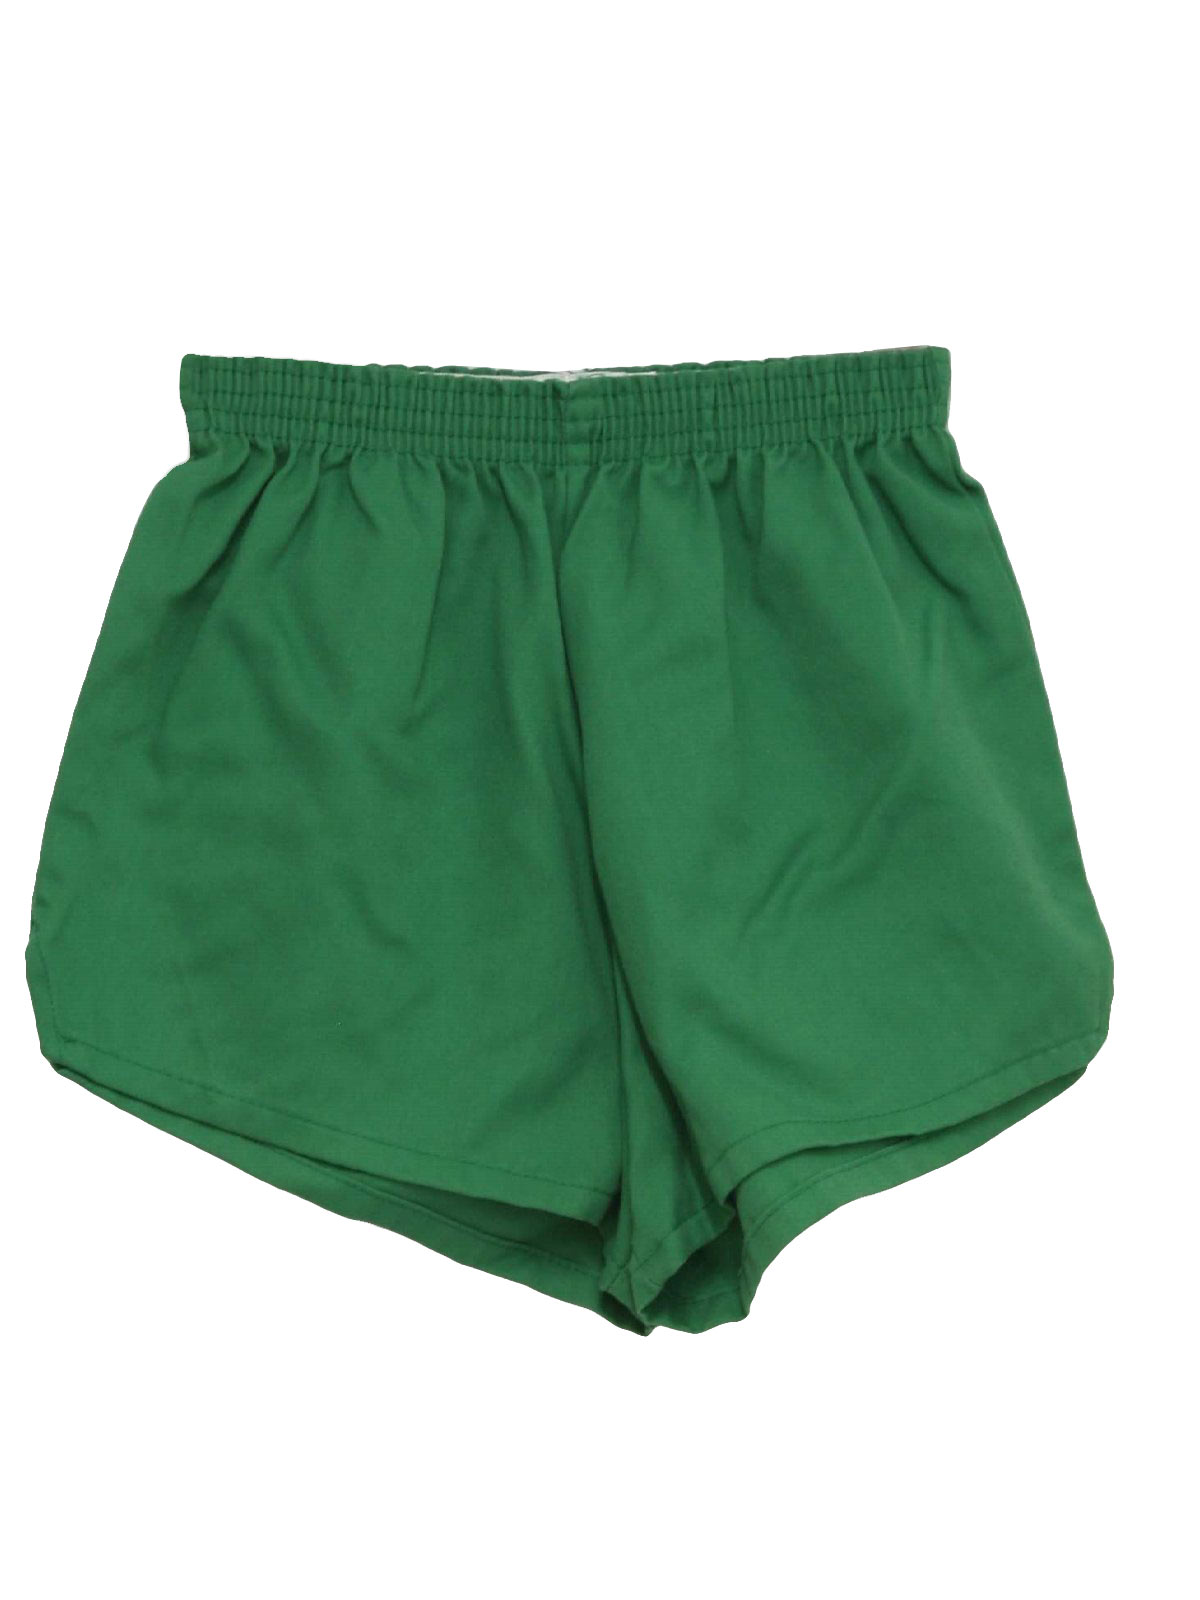 1980's Retro Shorts: 80s -Augusta- Mens green polyester and cotton ...